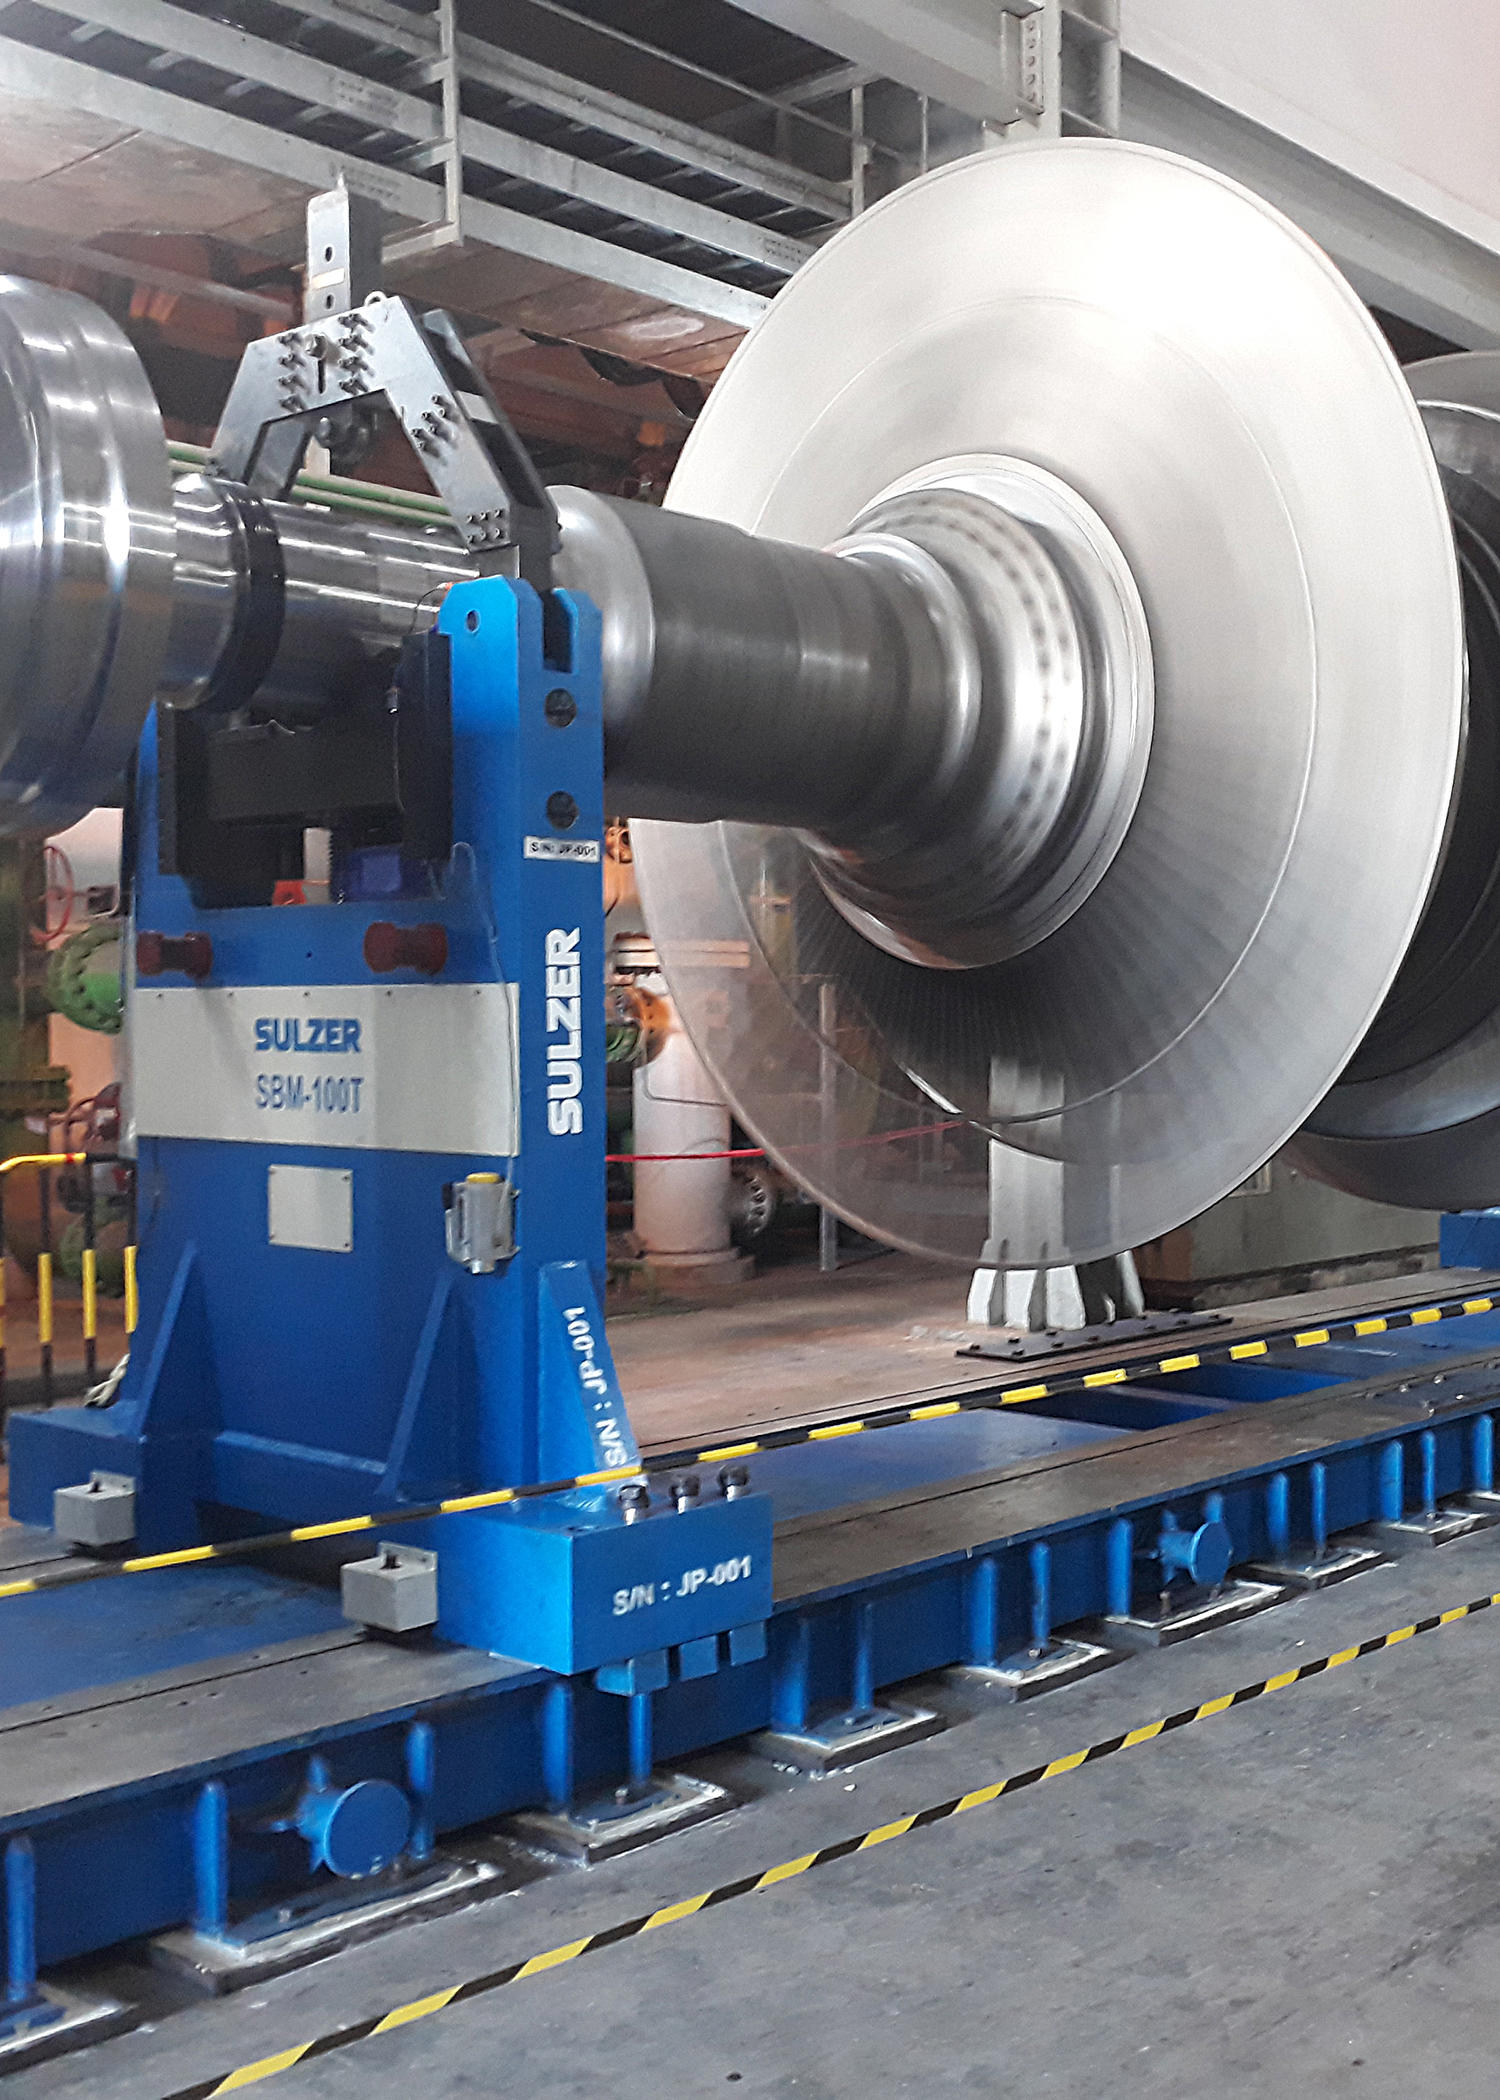 The completed rotor was balanced using Sulzer’s own equipment which had been shipped to site for the project